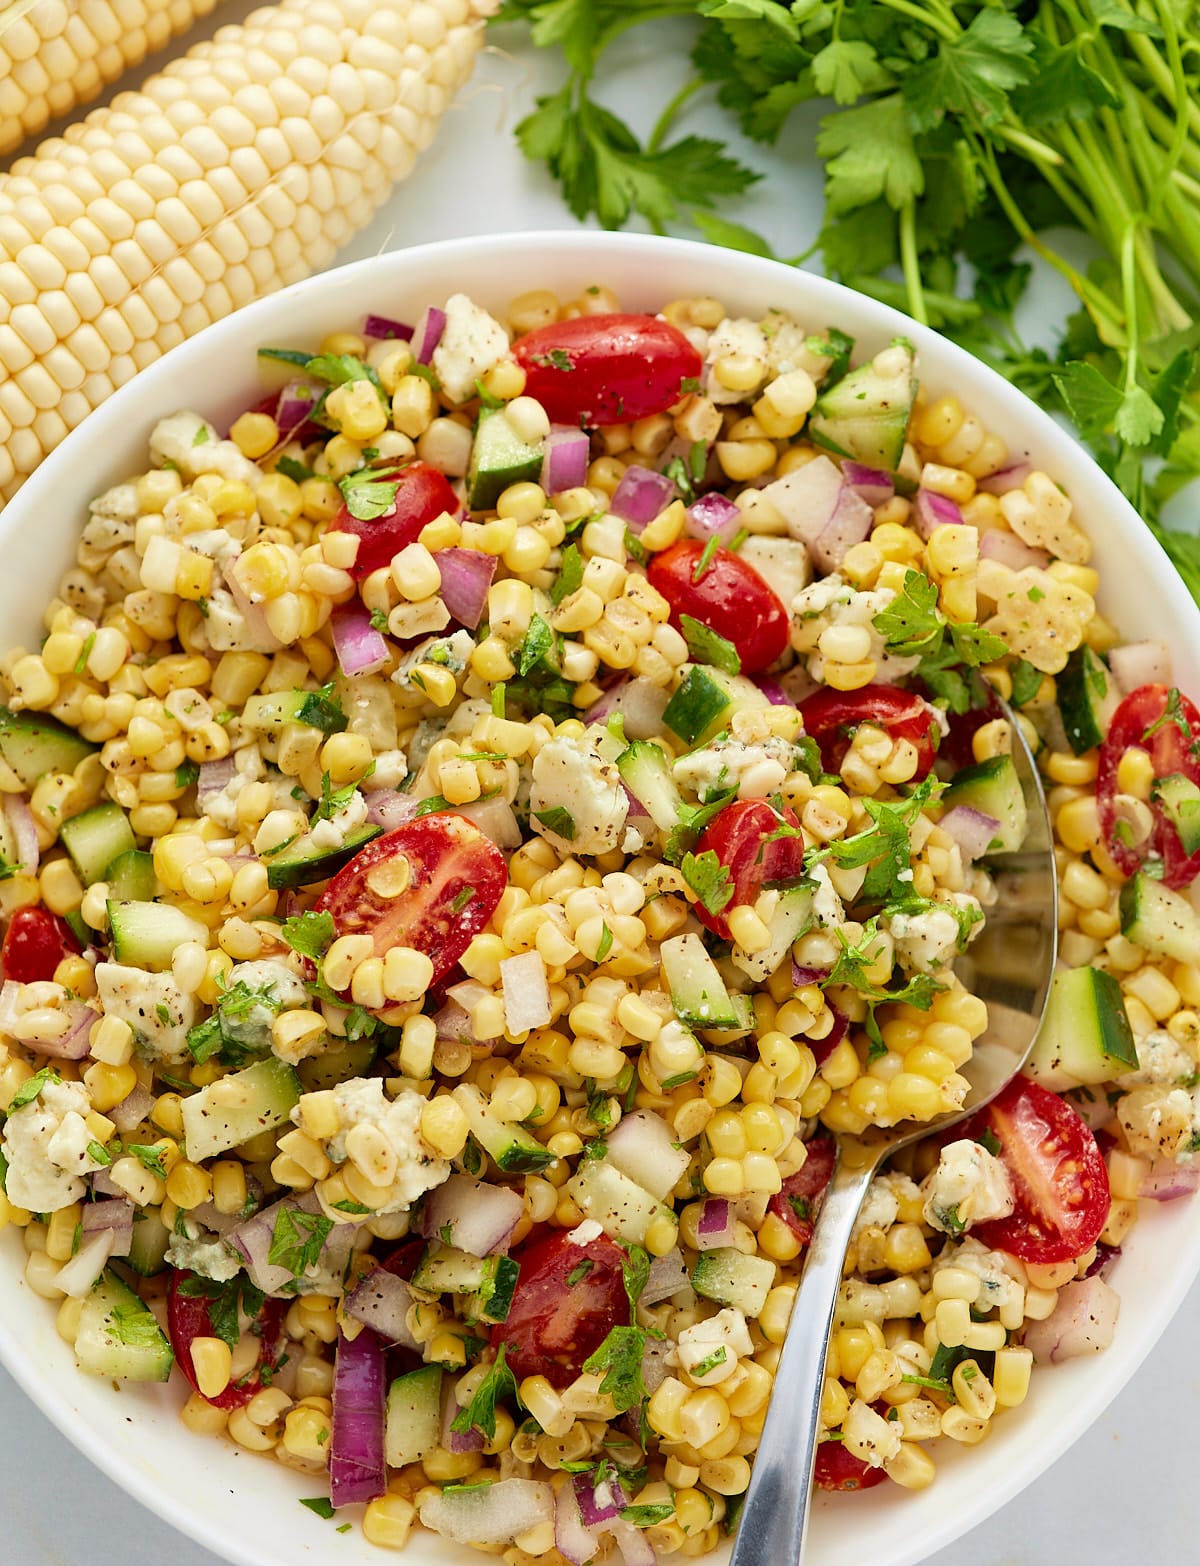 A fresh corn salad served in a white bowl with a spoon.